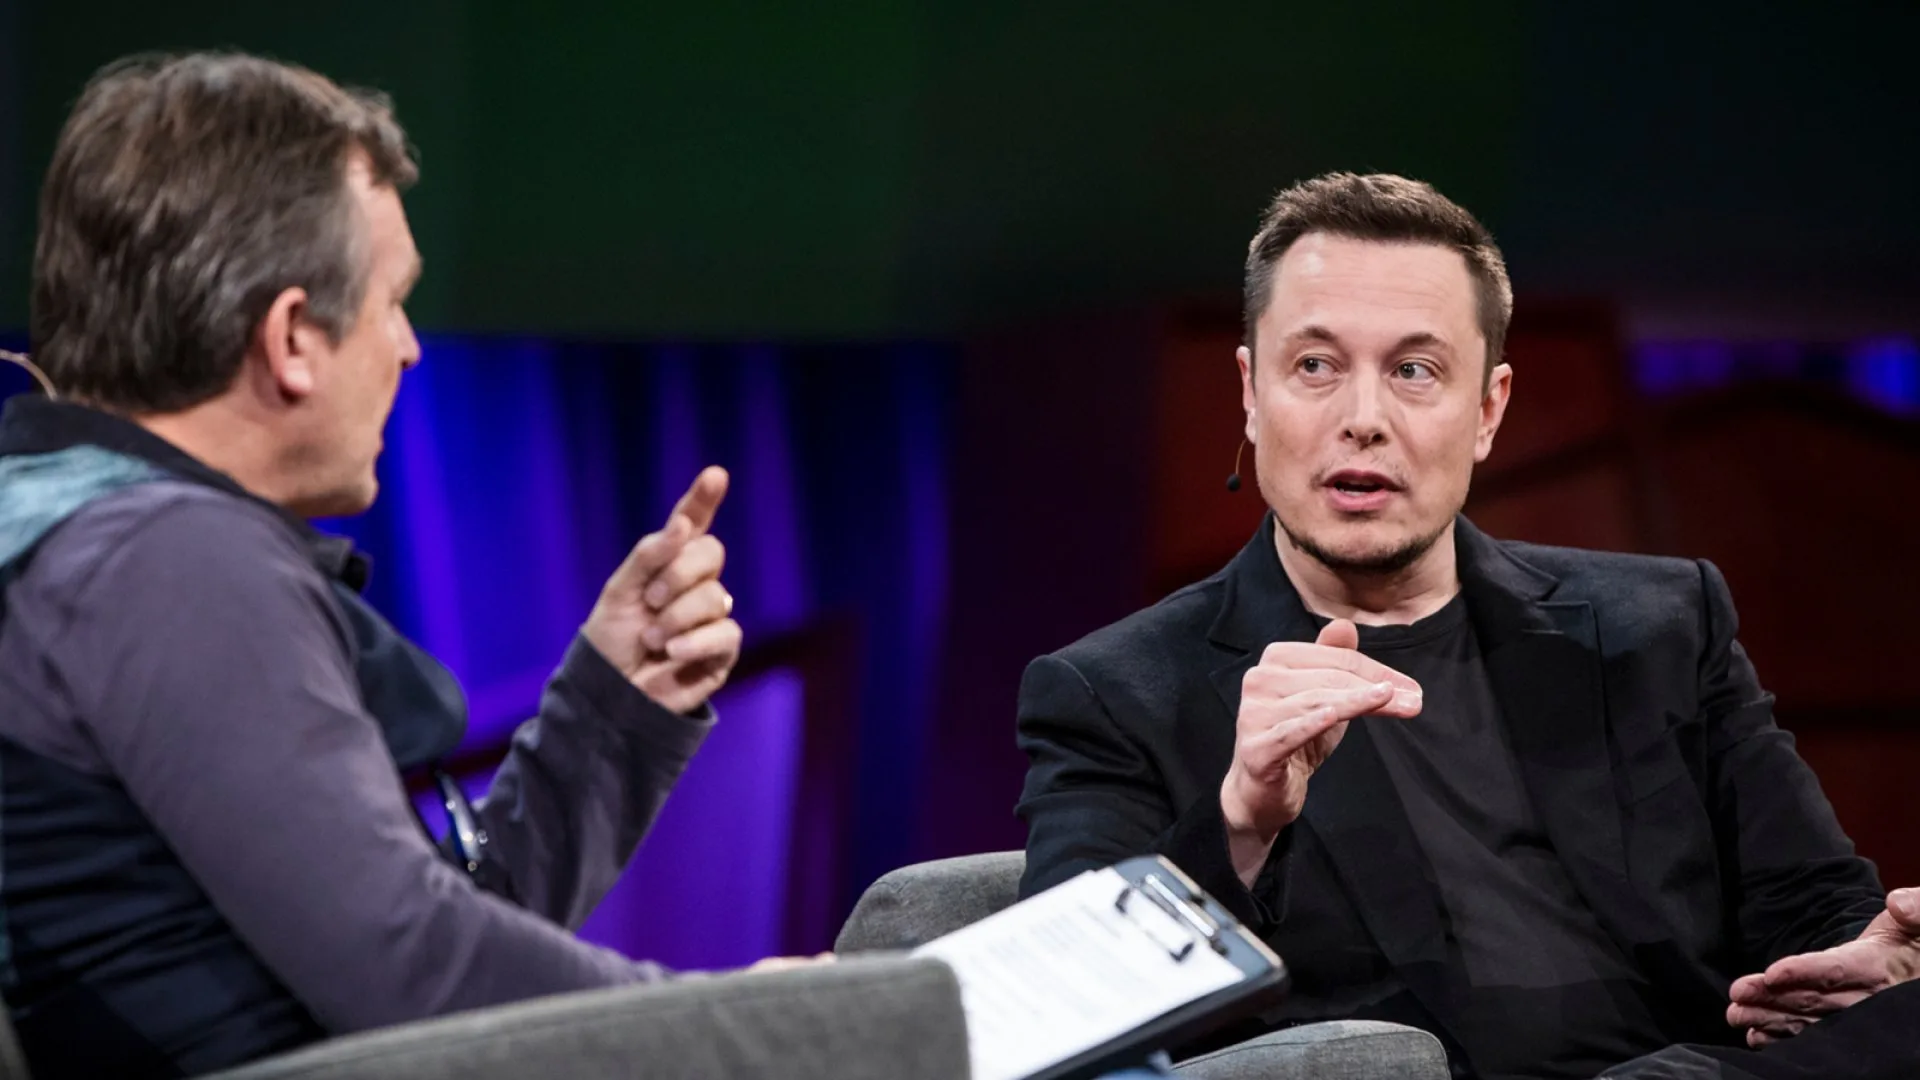 Elon Musk, a name synonymous with innovation, disruption, and boundless ambition, stands as one of the most influential figures of the 21st century.